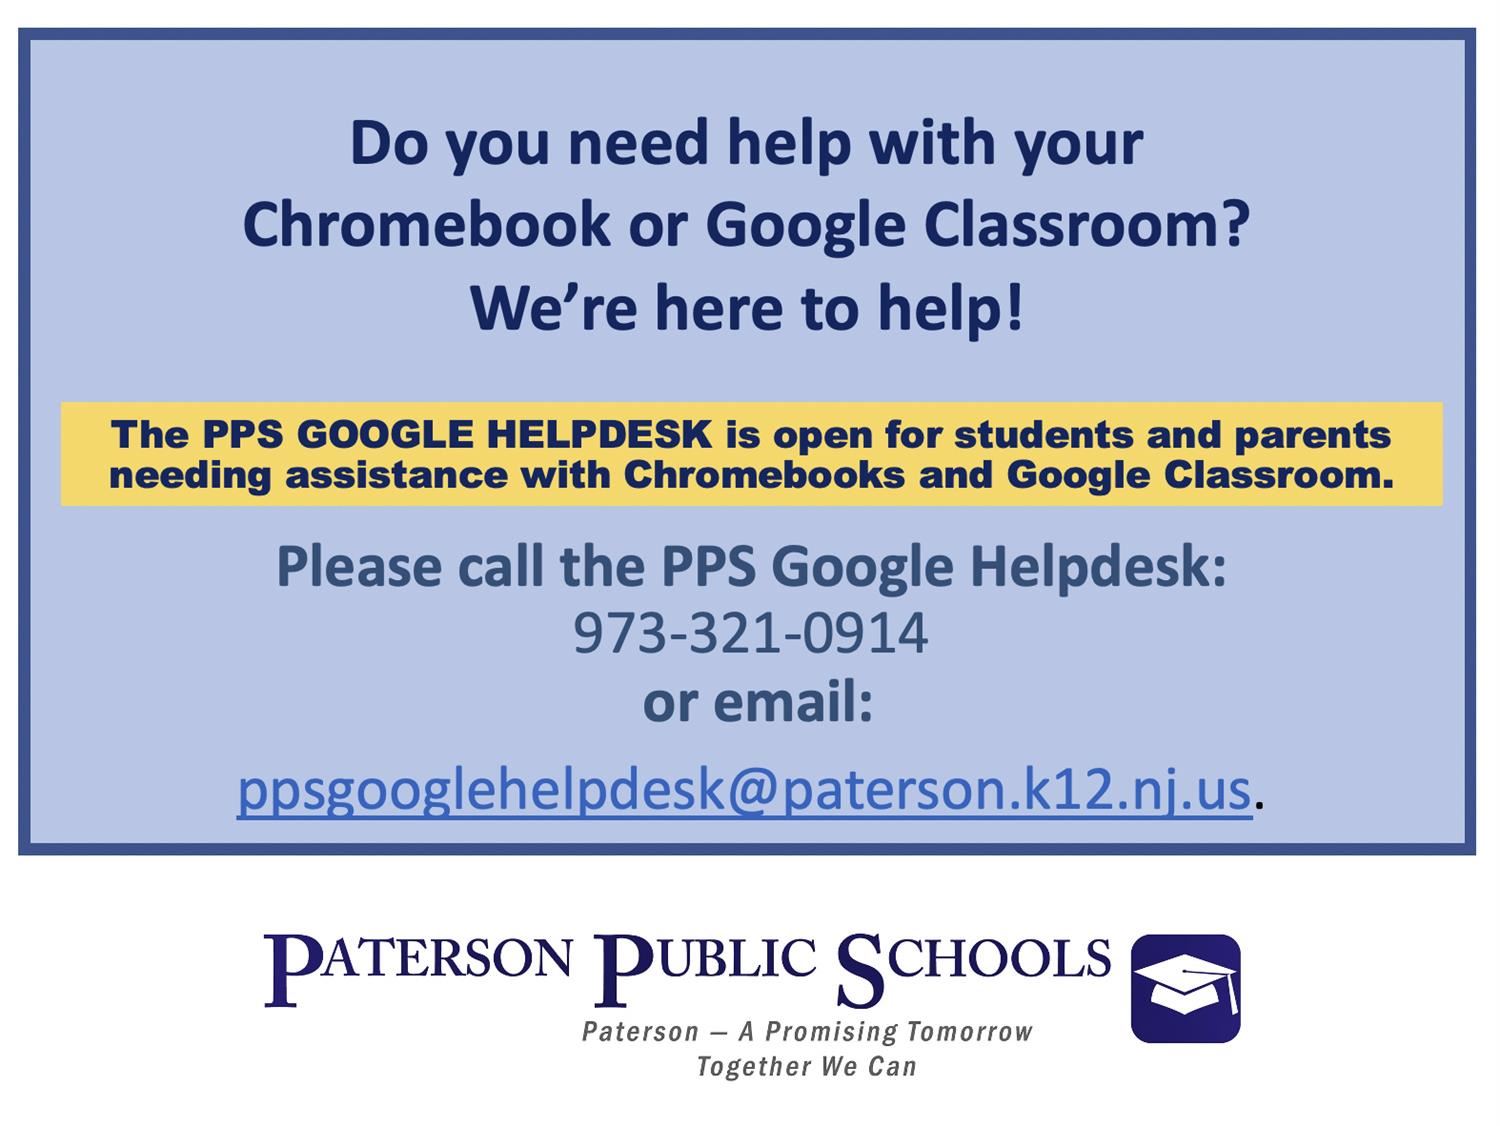 PPS Helpdesk for Google Classroom and Chromebooks. 973-321-0914 or click image to send email.